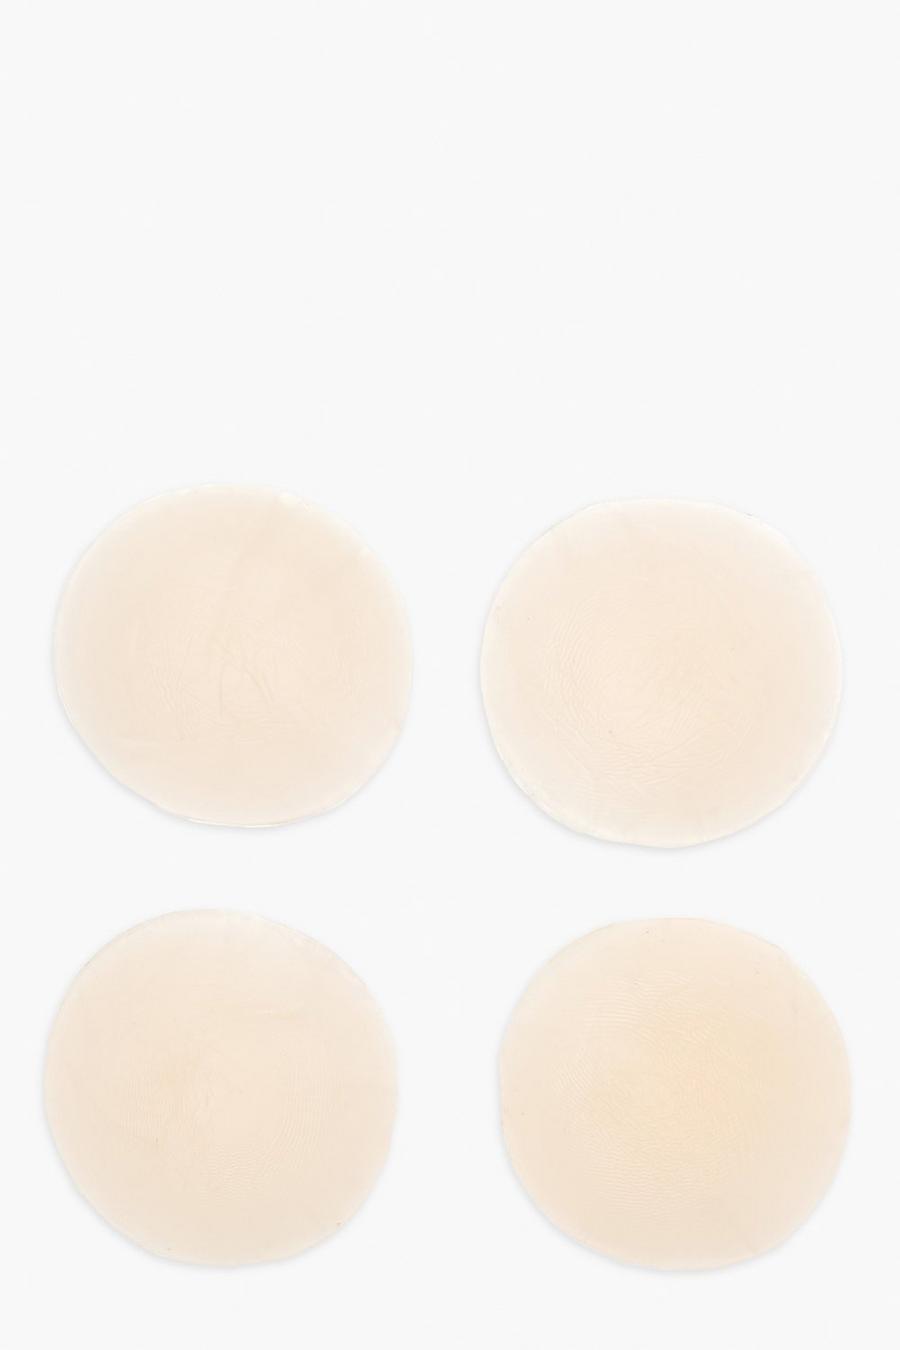 Boohoo Beauty - Copricapezzoli in silicone - set di 2, Natural beis